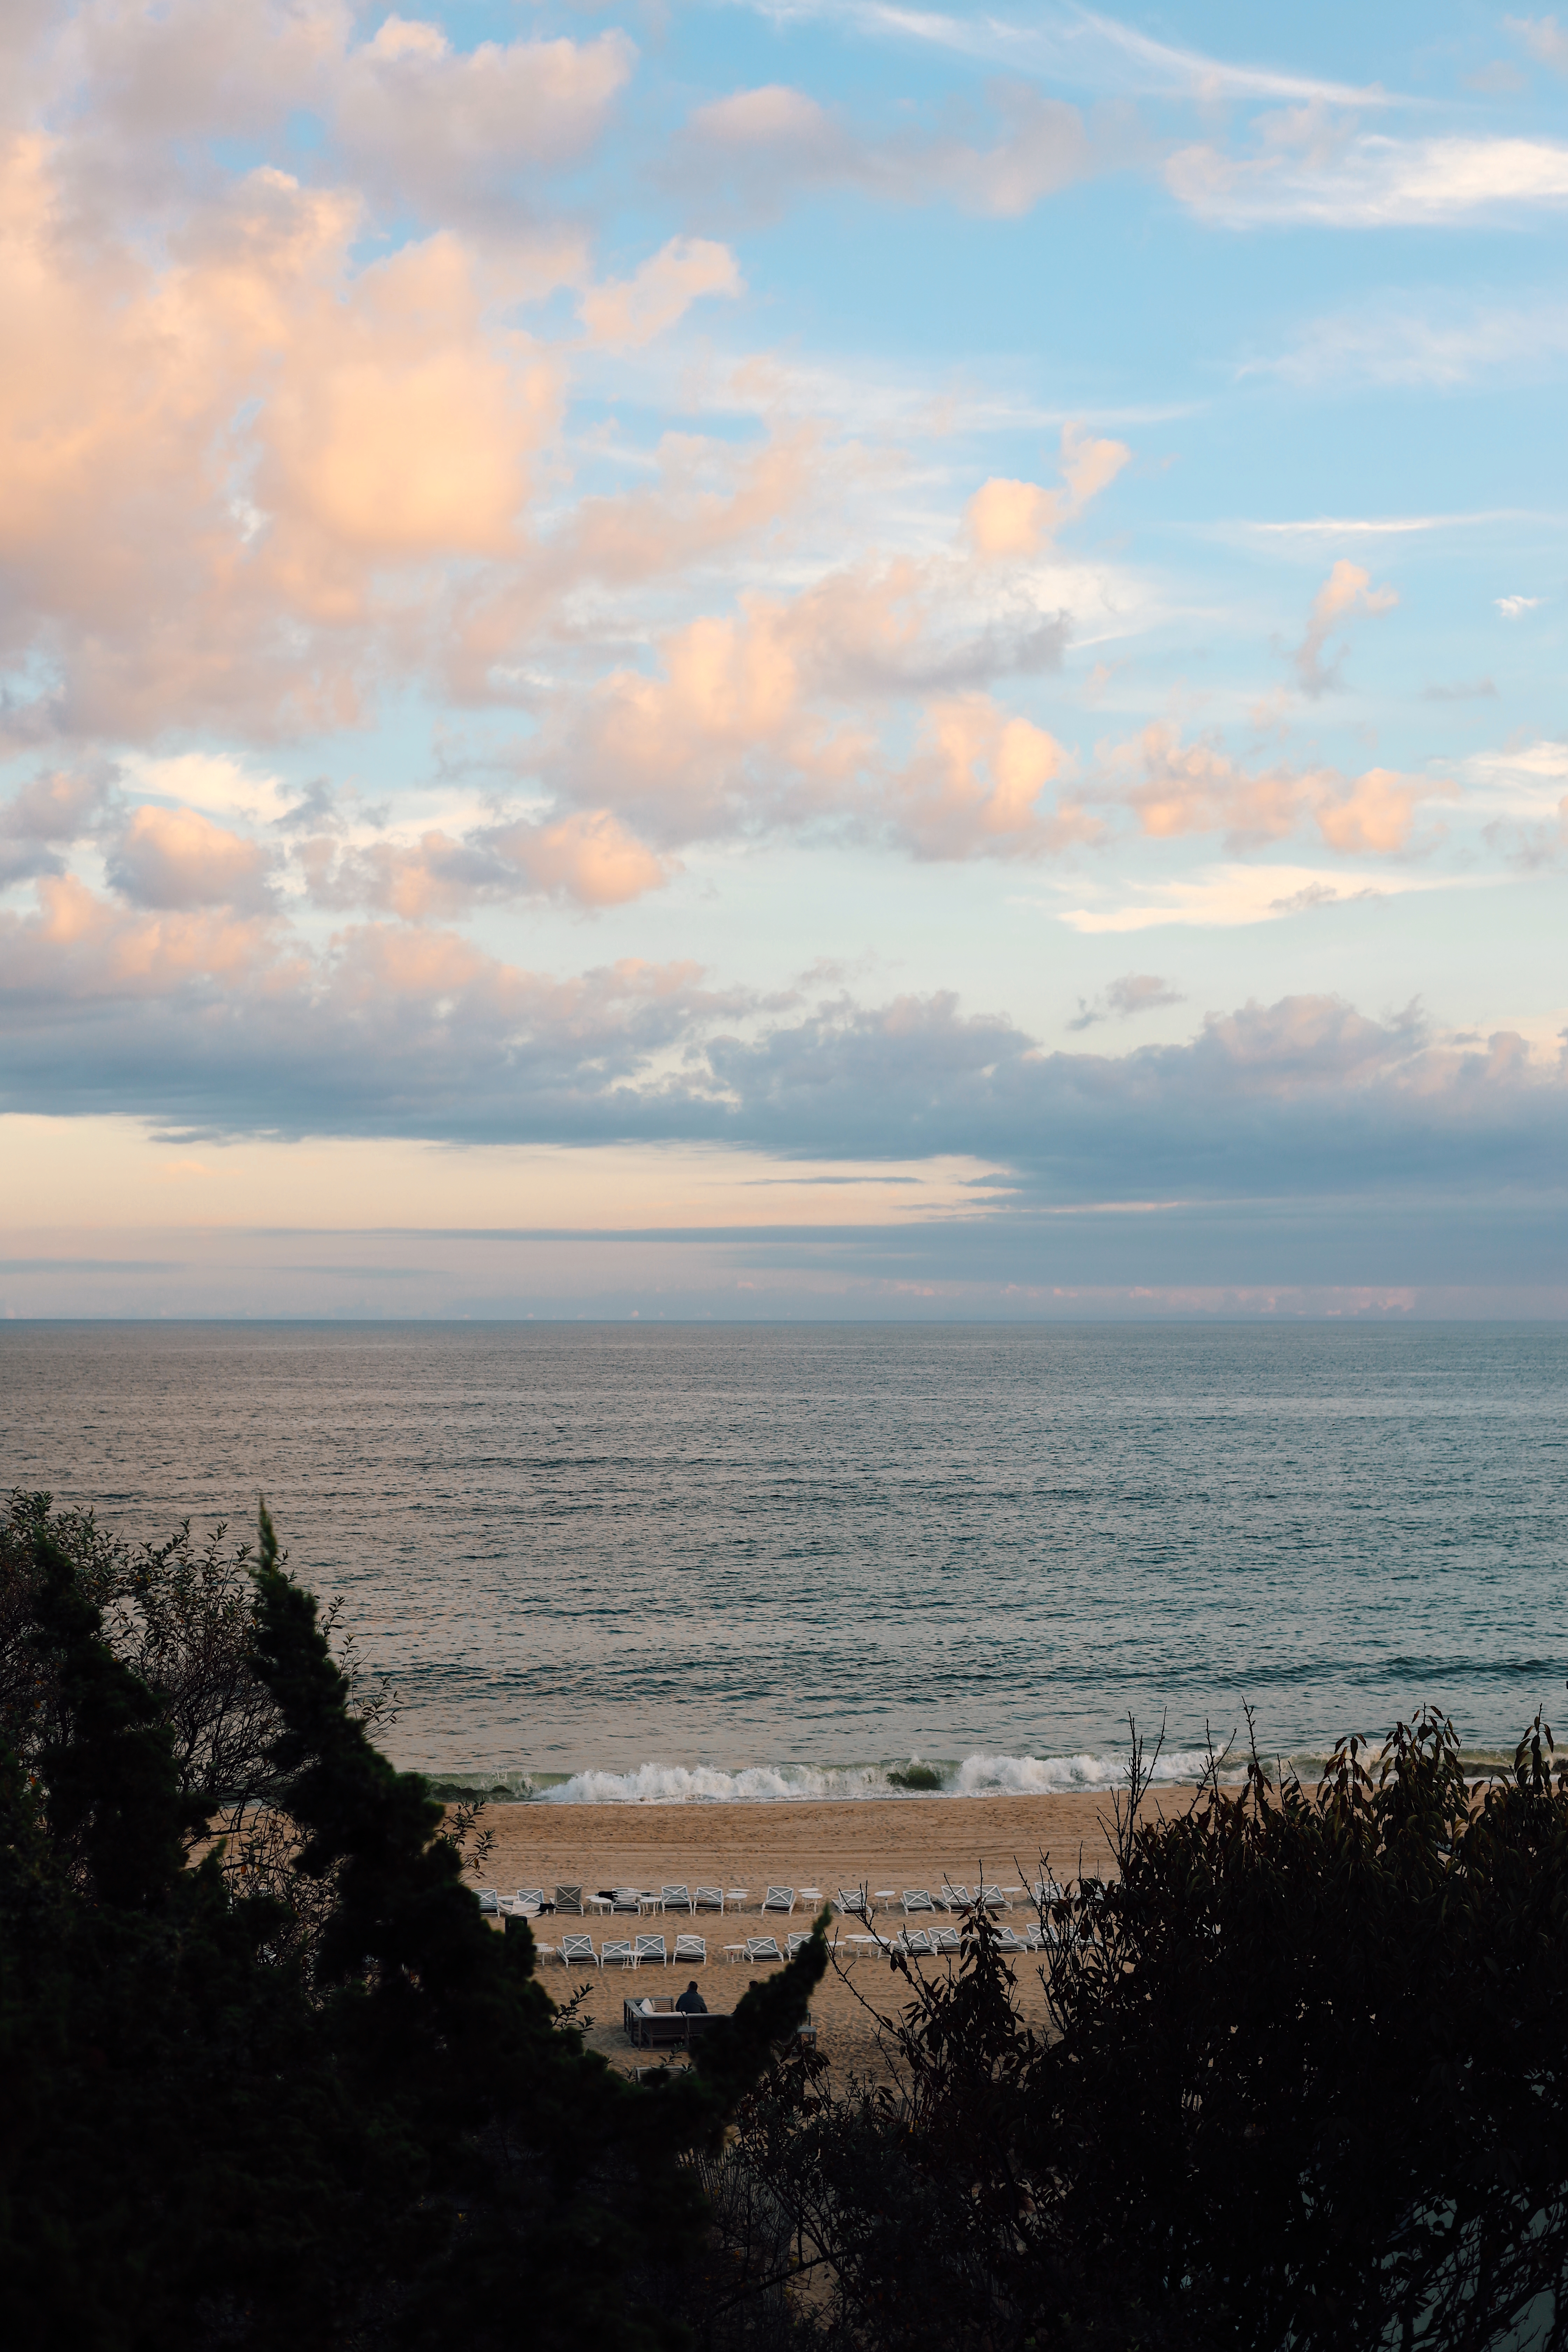 View of the Montauk beach at dusk.